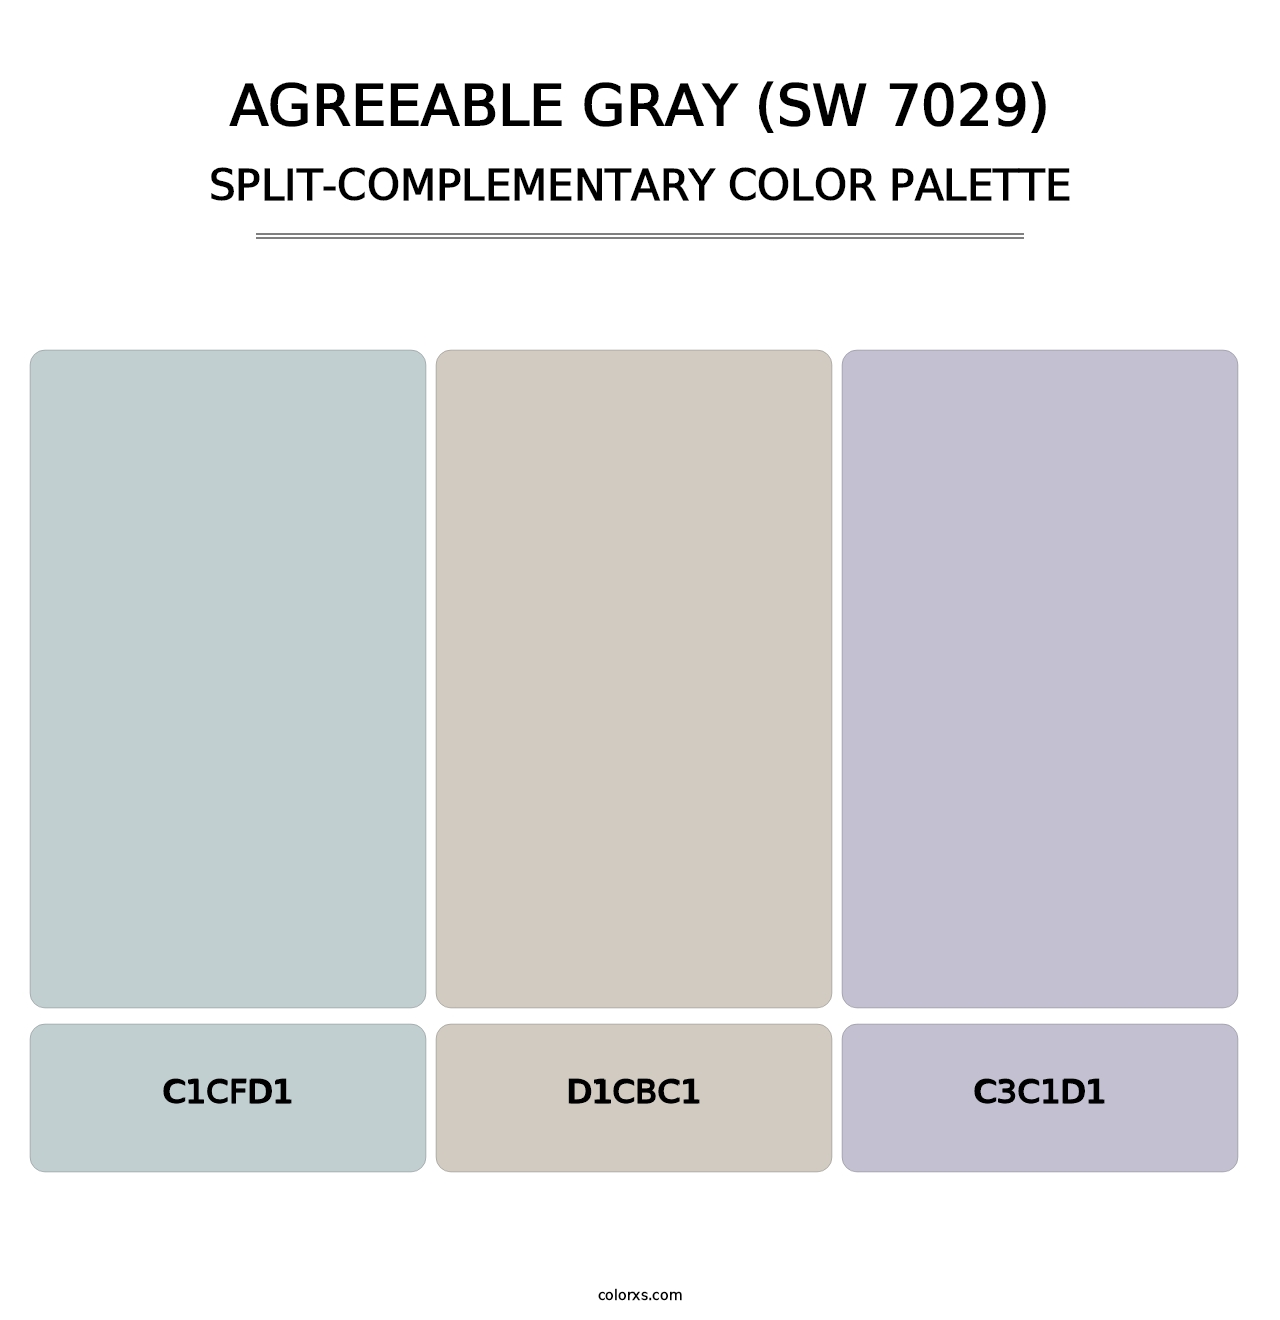 Agreeable Gray (SW 7029) - Split-Complementary Color Palette